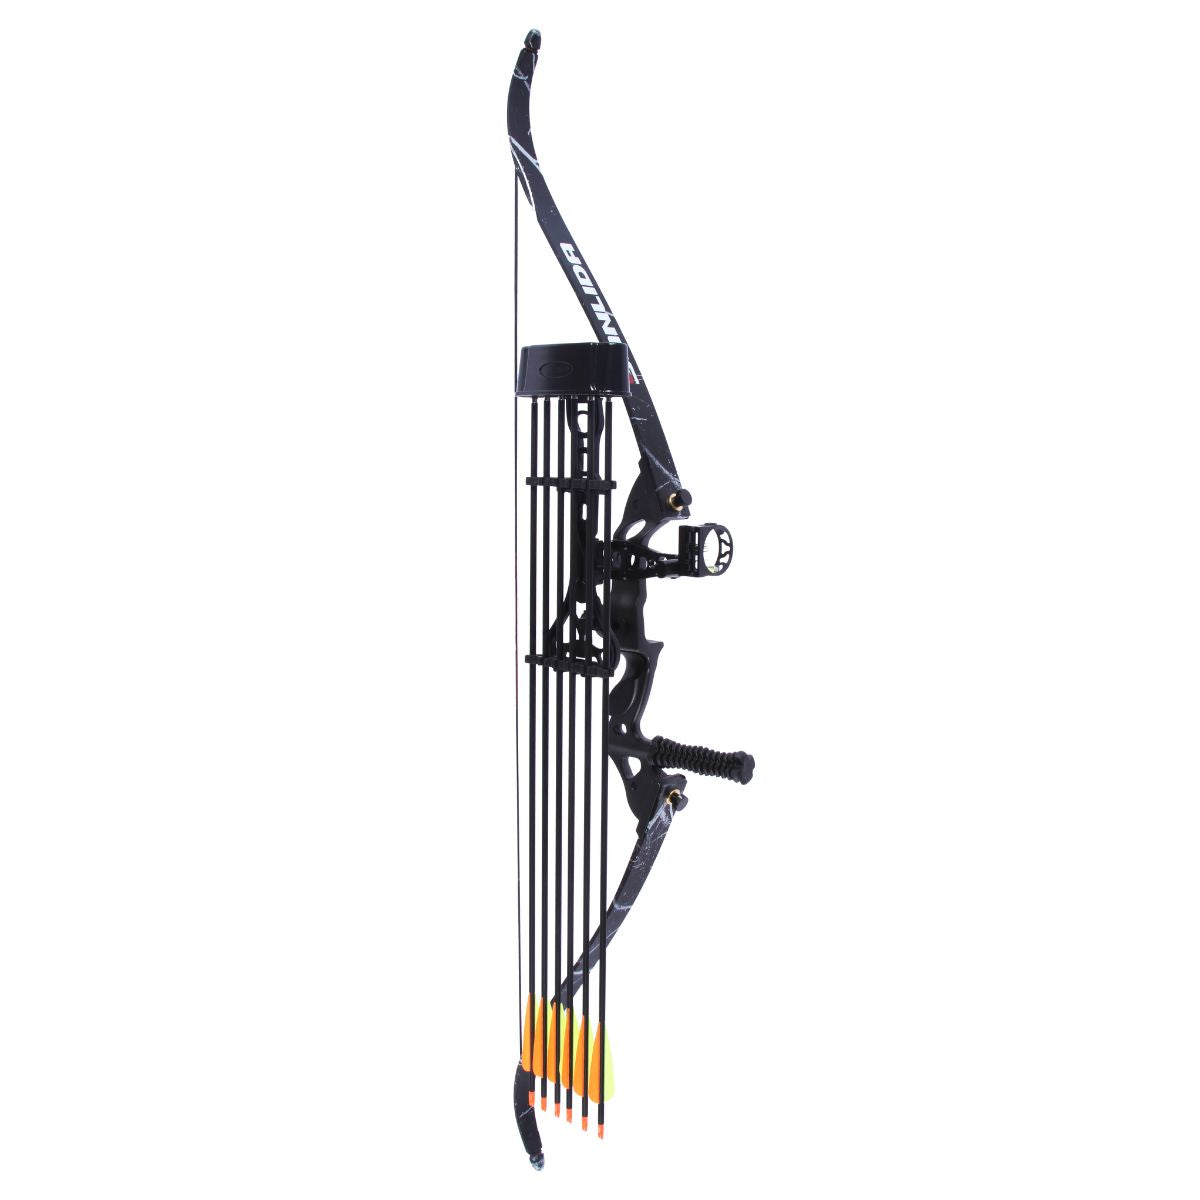 Embedded Quiver - AEQ01 - Archery Equipment 3